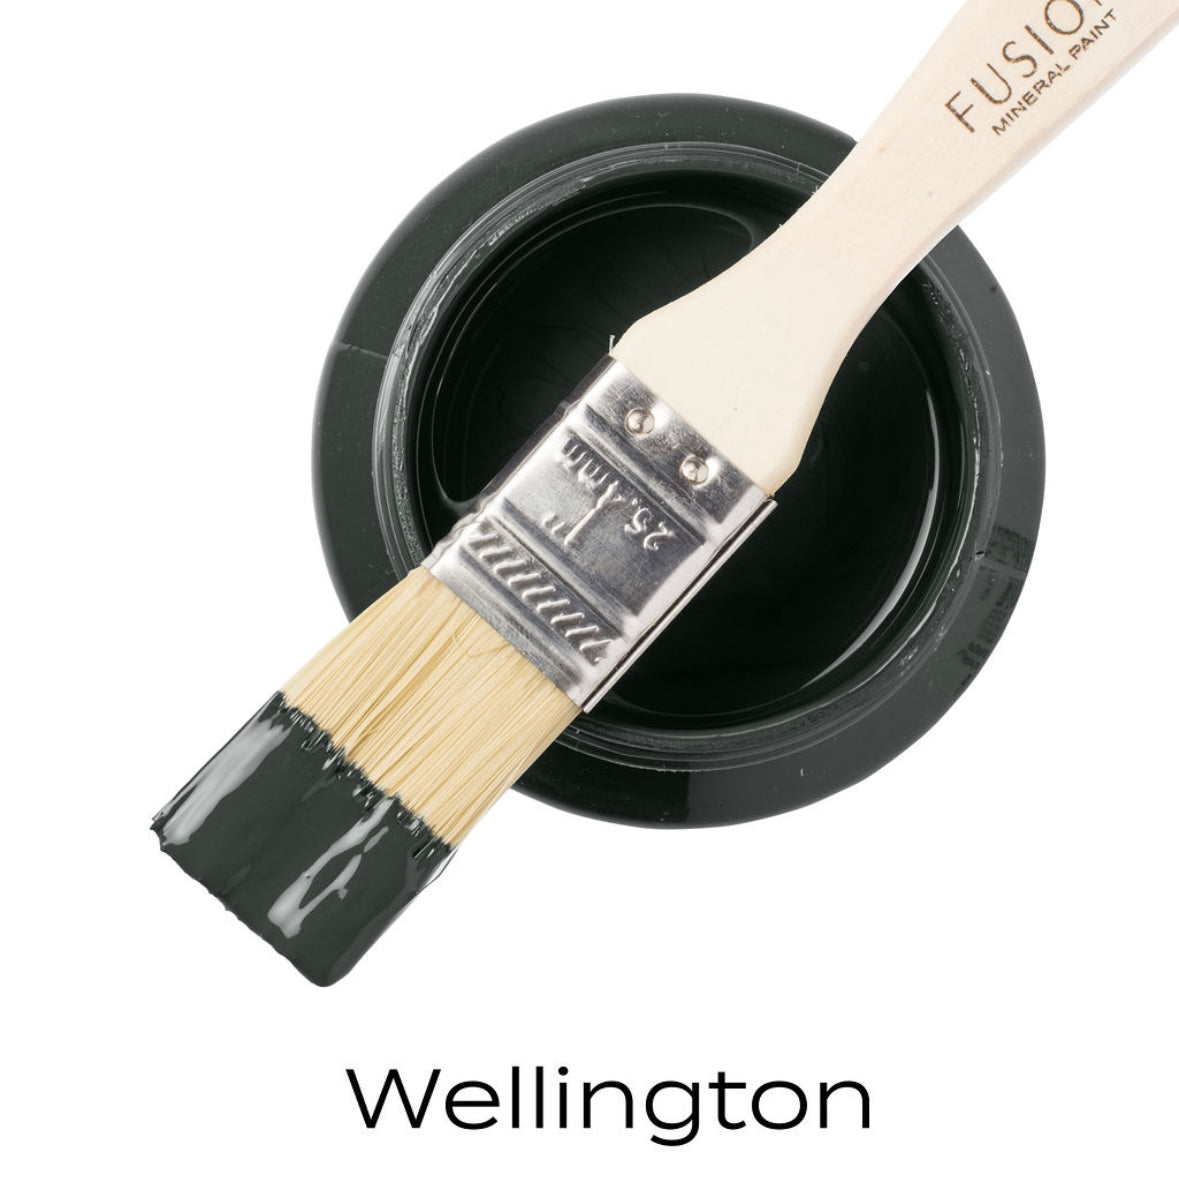 Wellington by Fusion